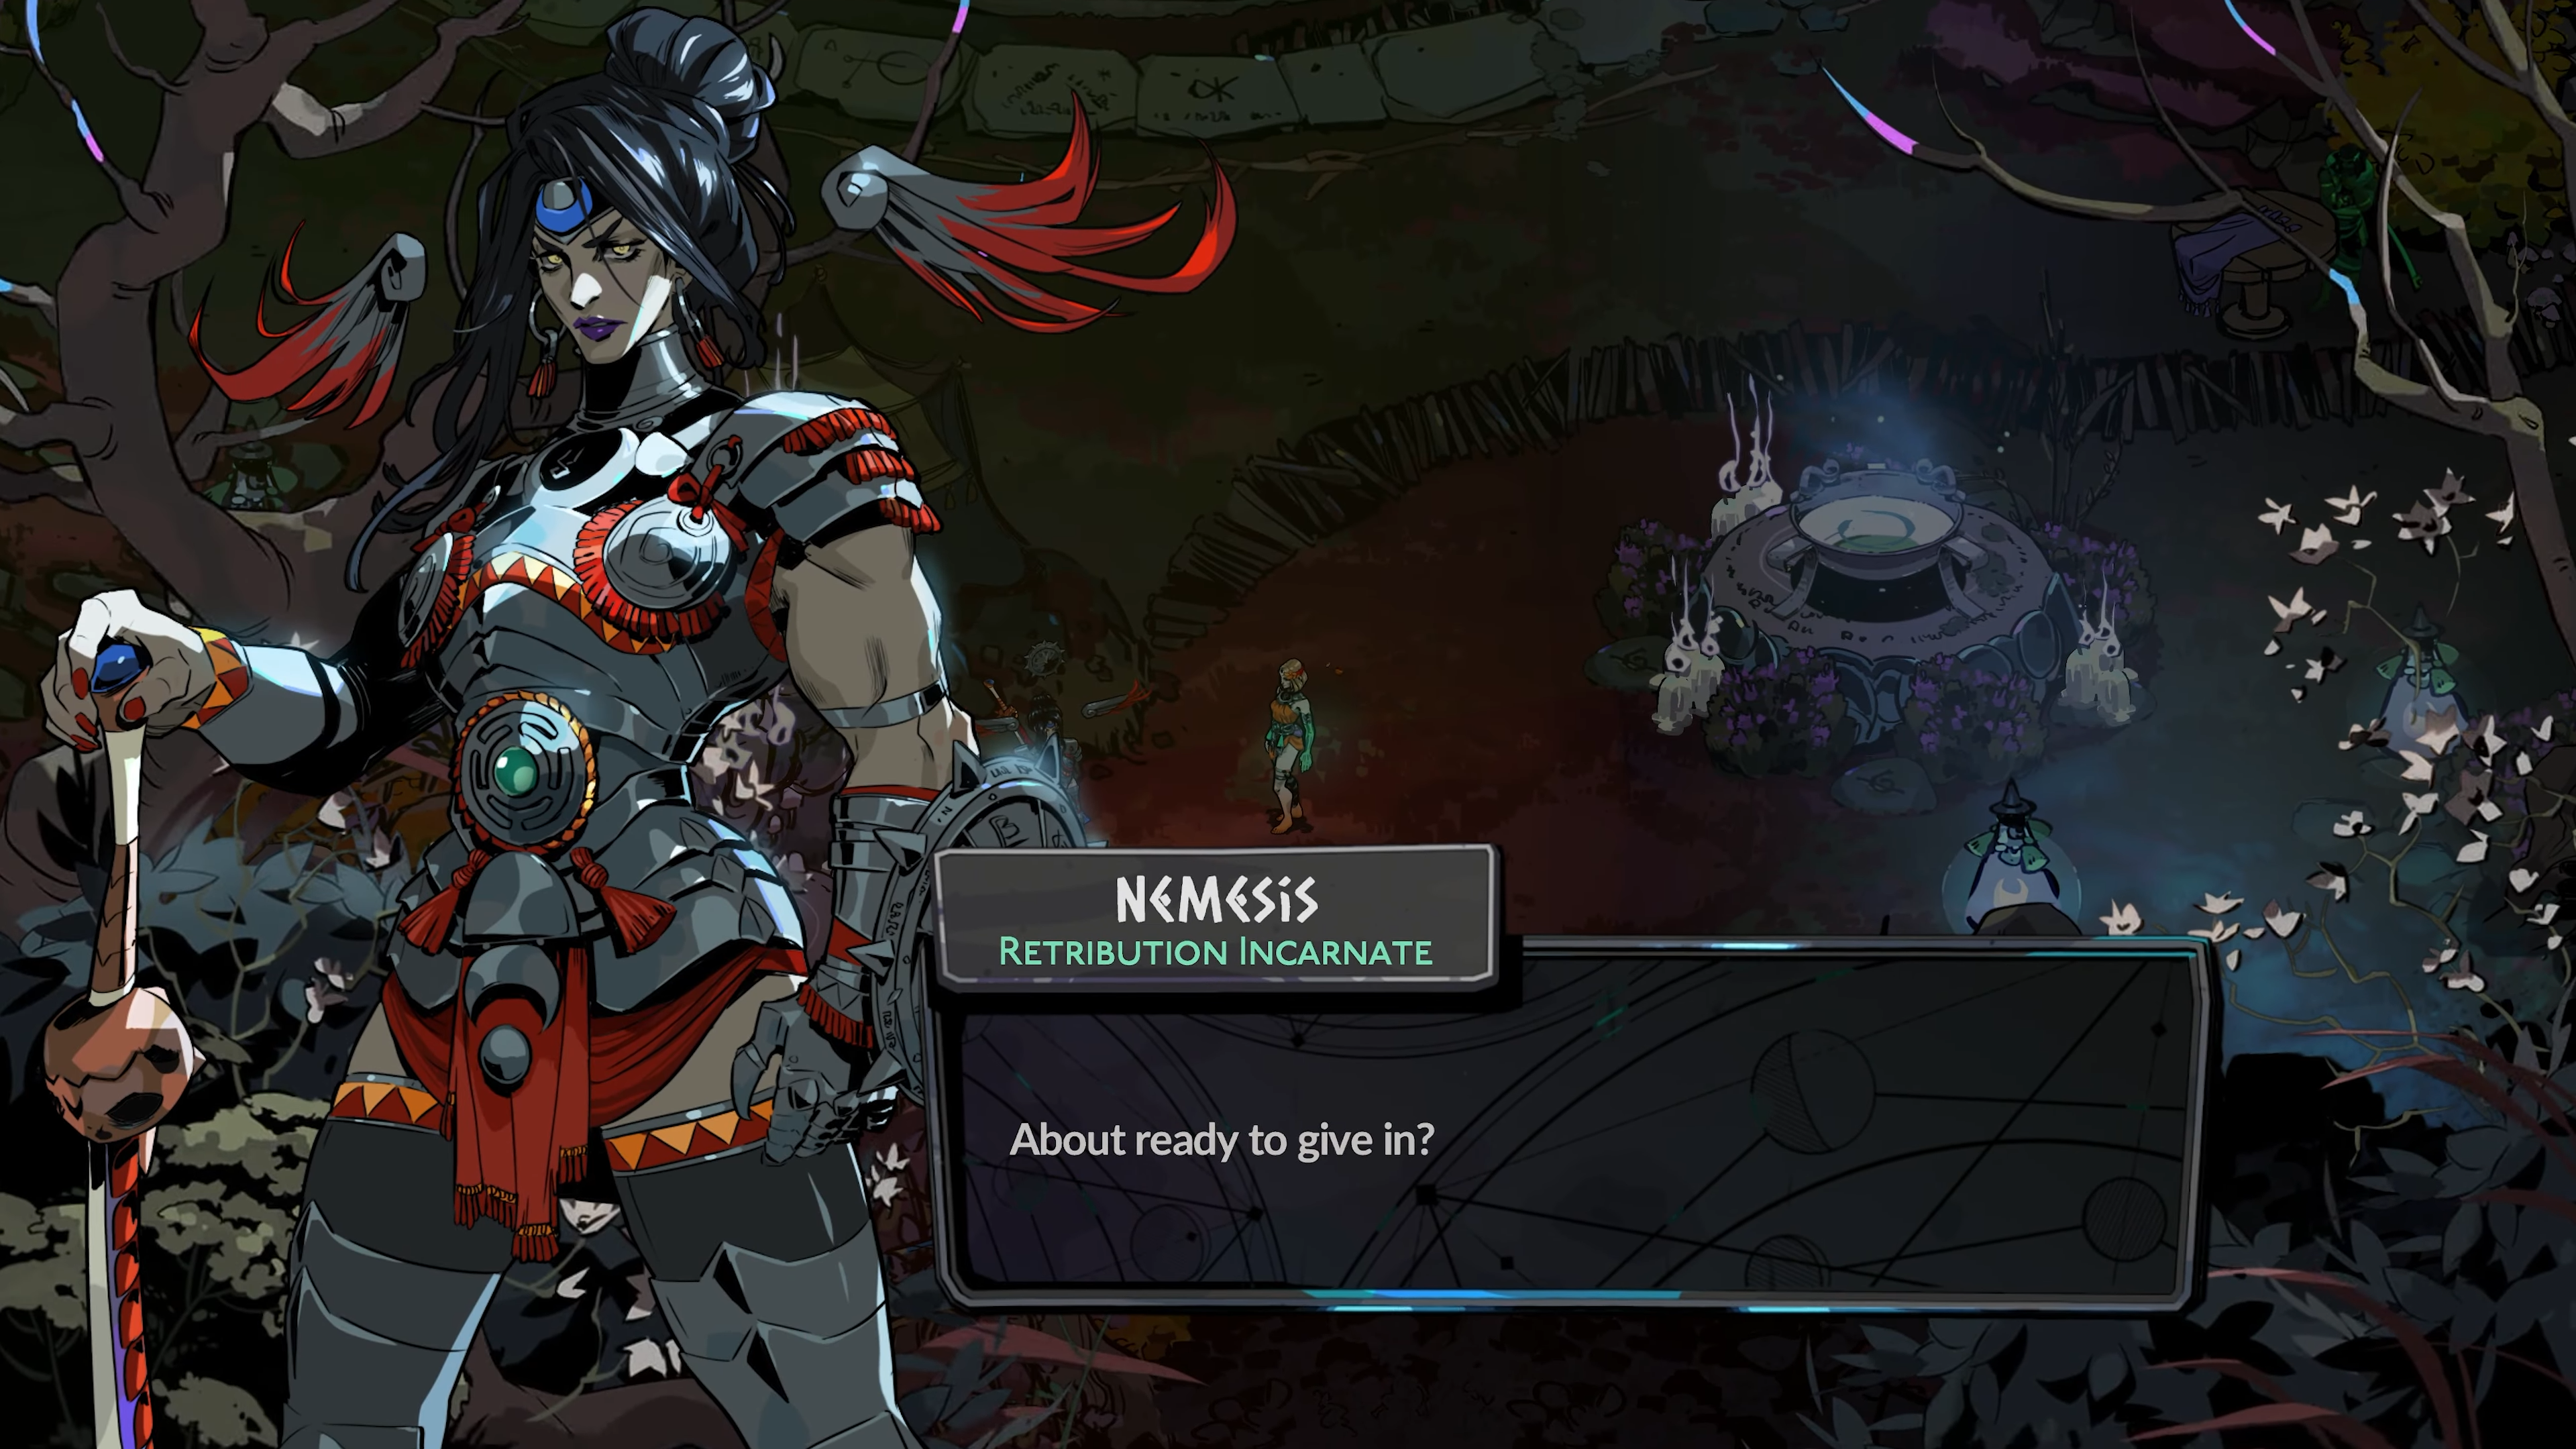 In a dialogue screen from Hades 2, Nemesis (a dark-haired, muscular woman in ornate armour) asks the protagonist if she's ready to give in.